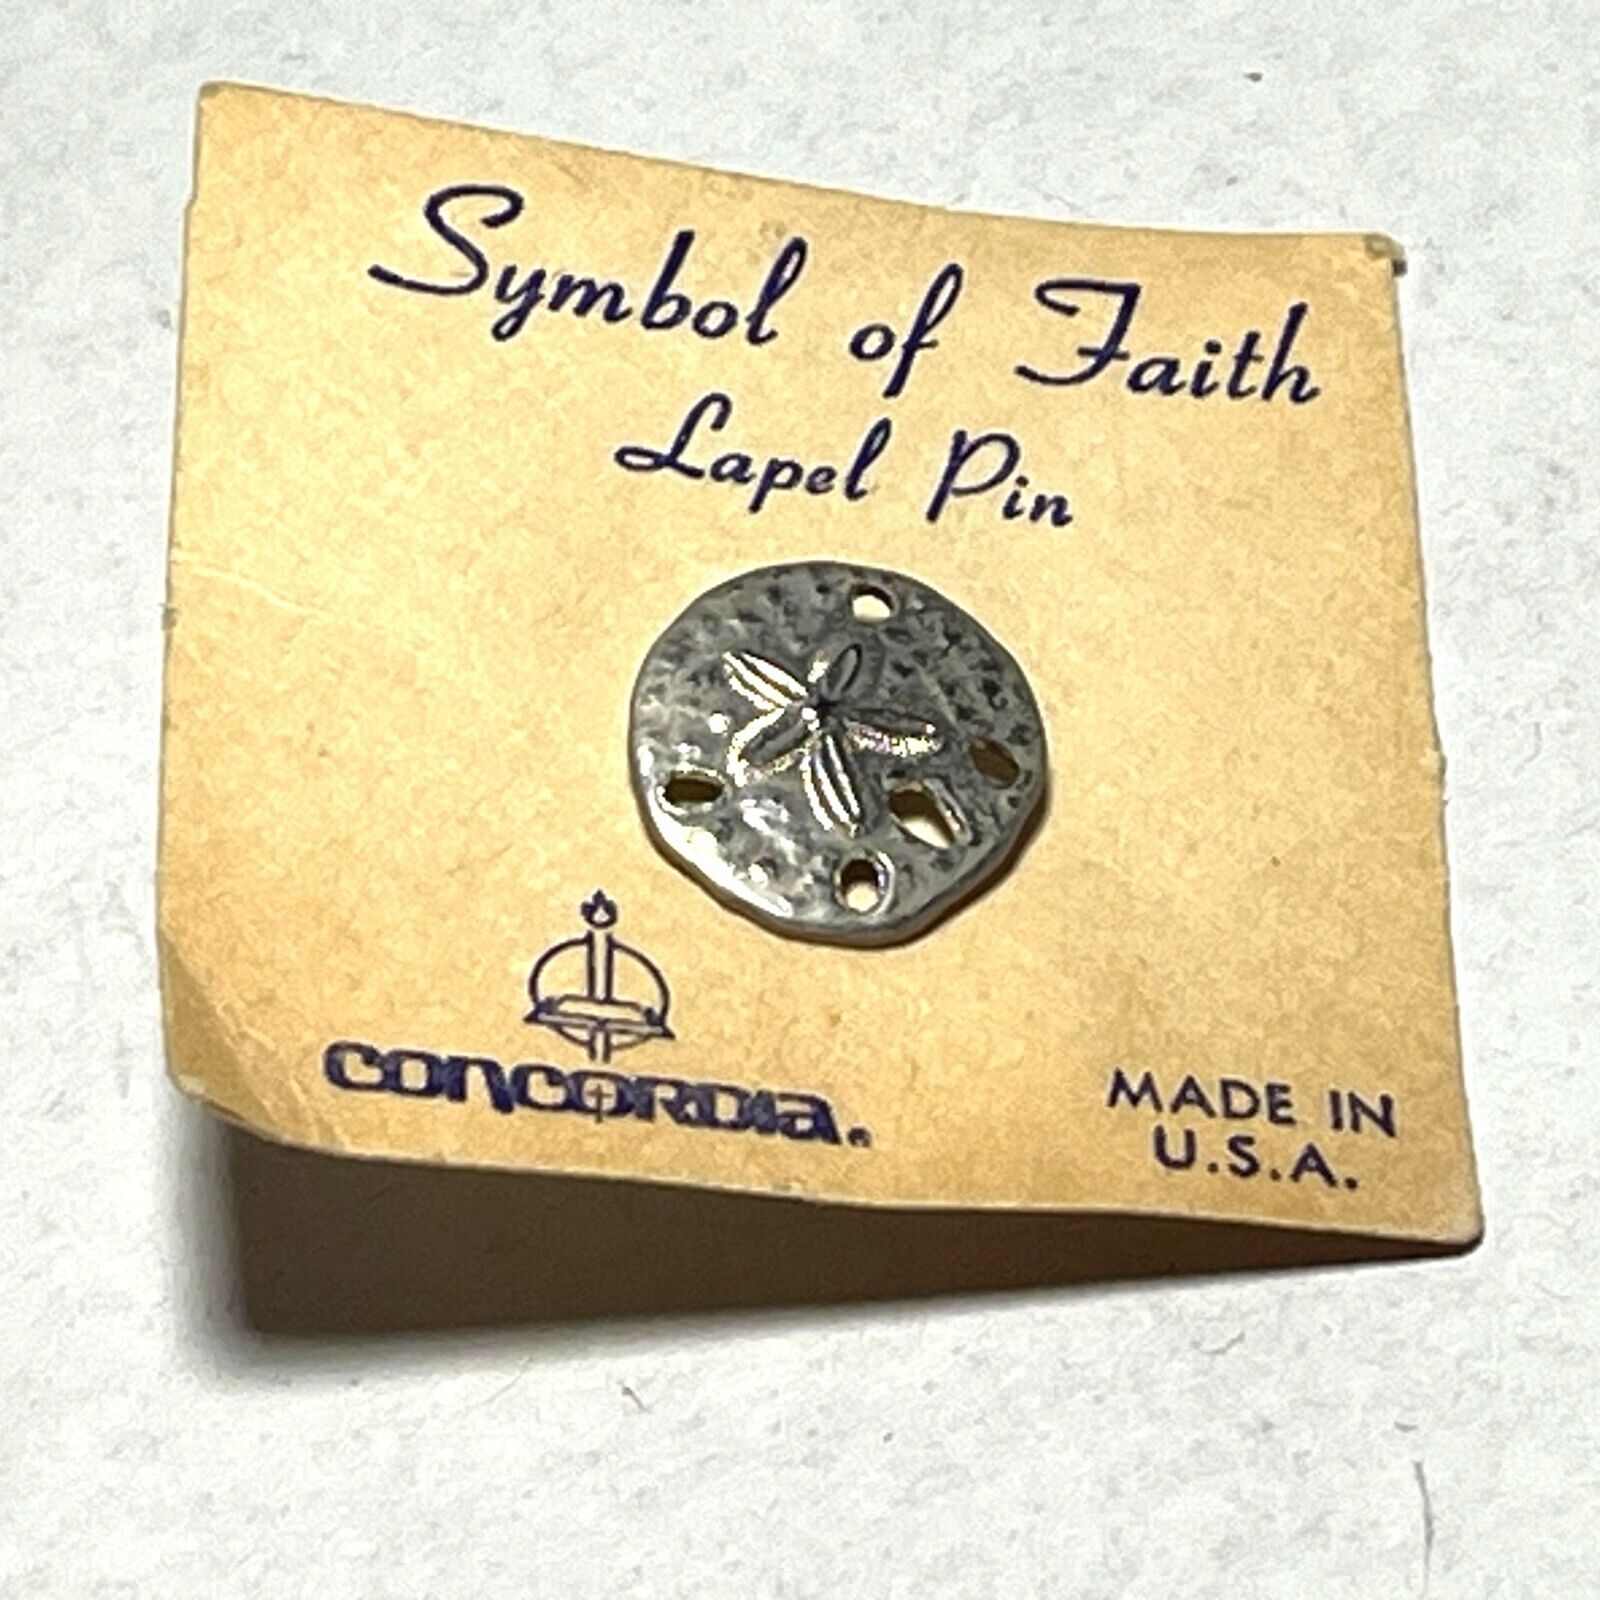 Vintage Silver Sand Dollar Concordia Symbol Of Faith Lapel Pin Made In USA